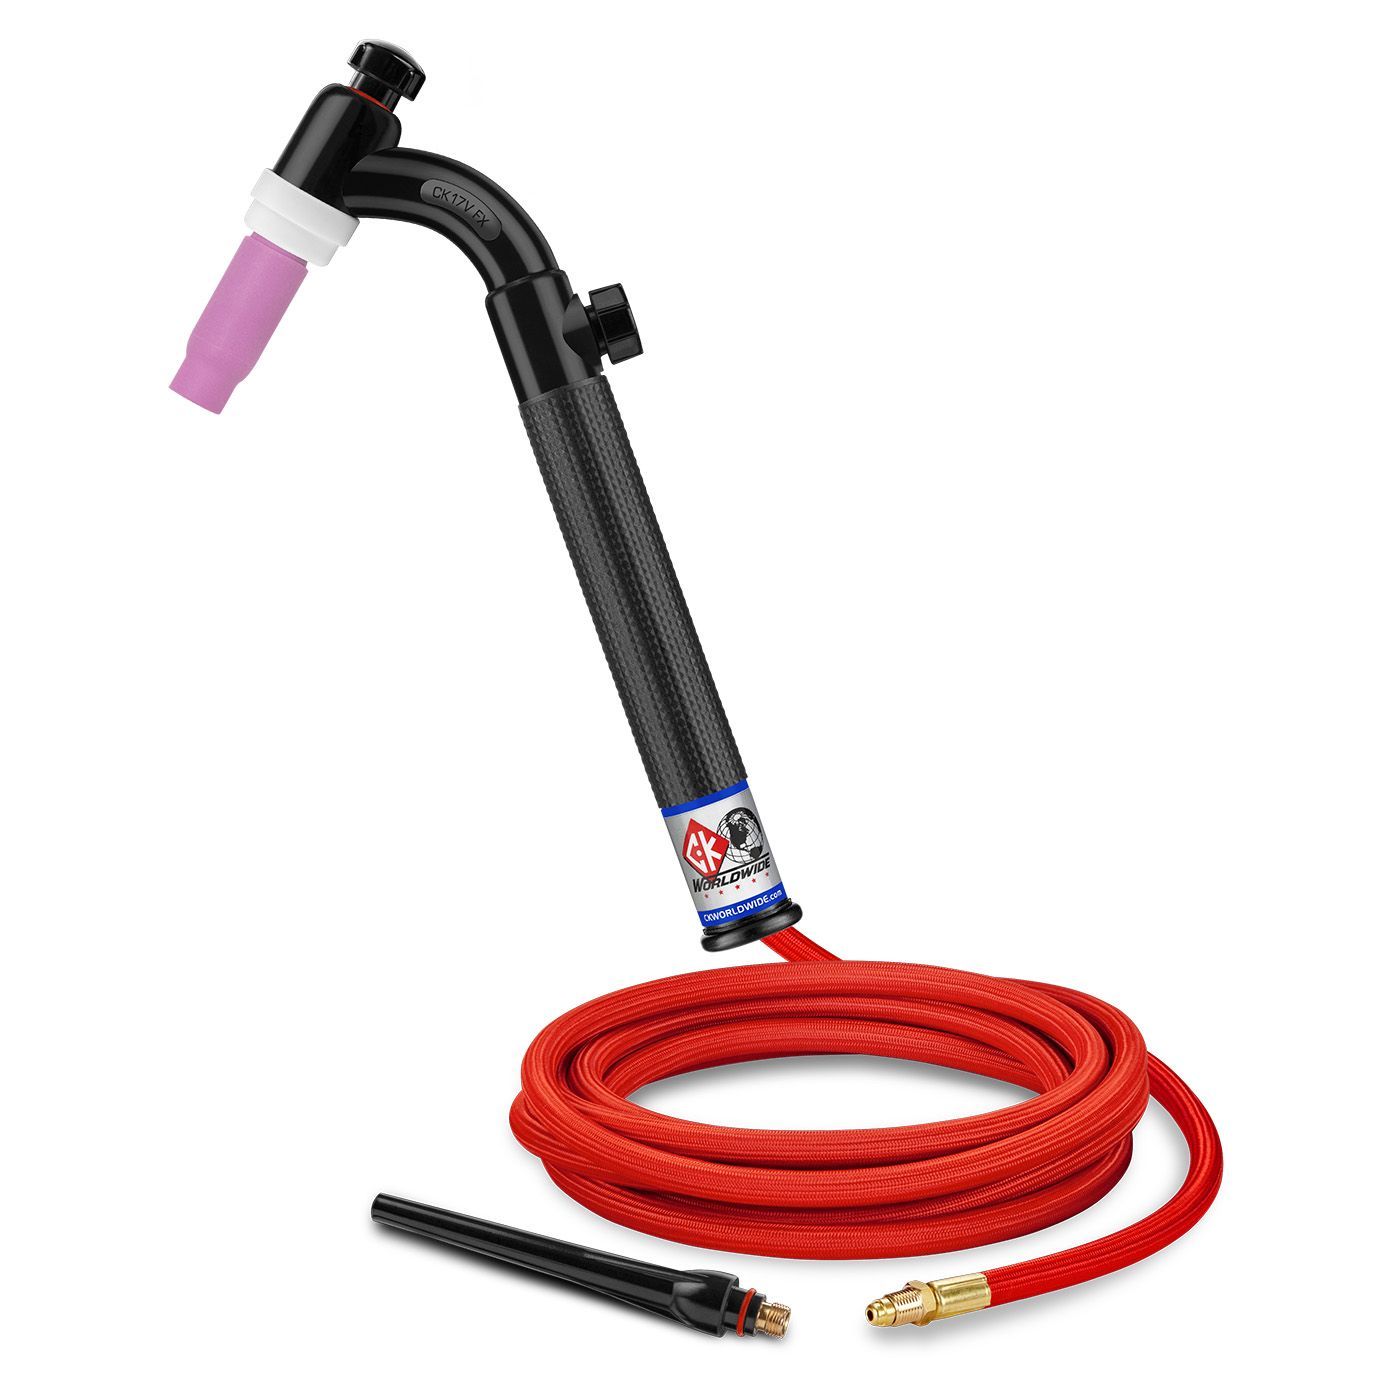 CK Worldwide TIG Torch - #17 Style W/ Gas control valve - (CK17V-12-RSF FX) W/ 12.5ft Super Flex cable